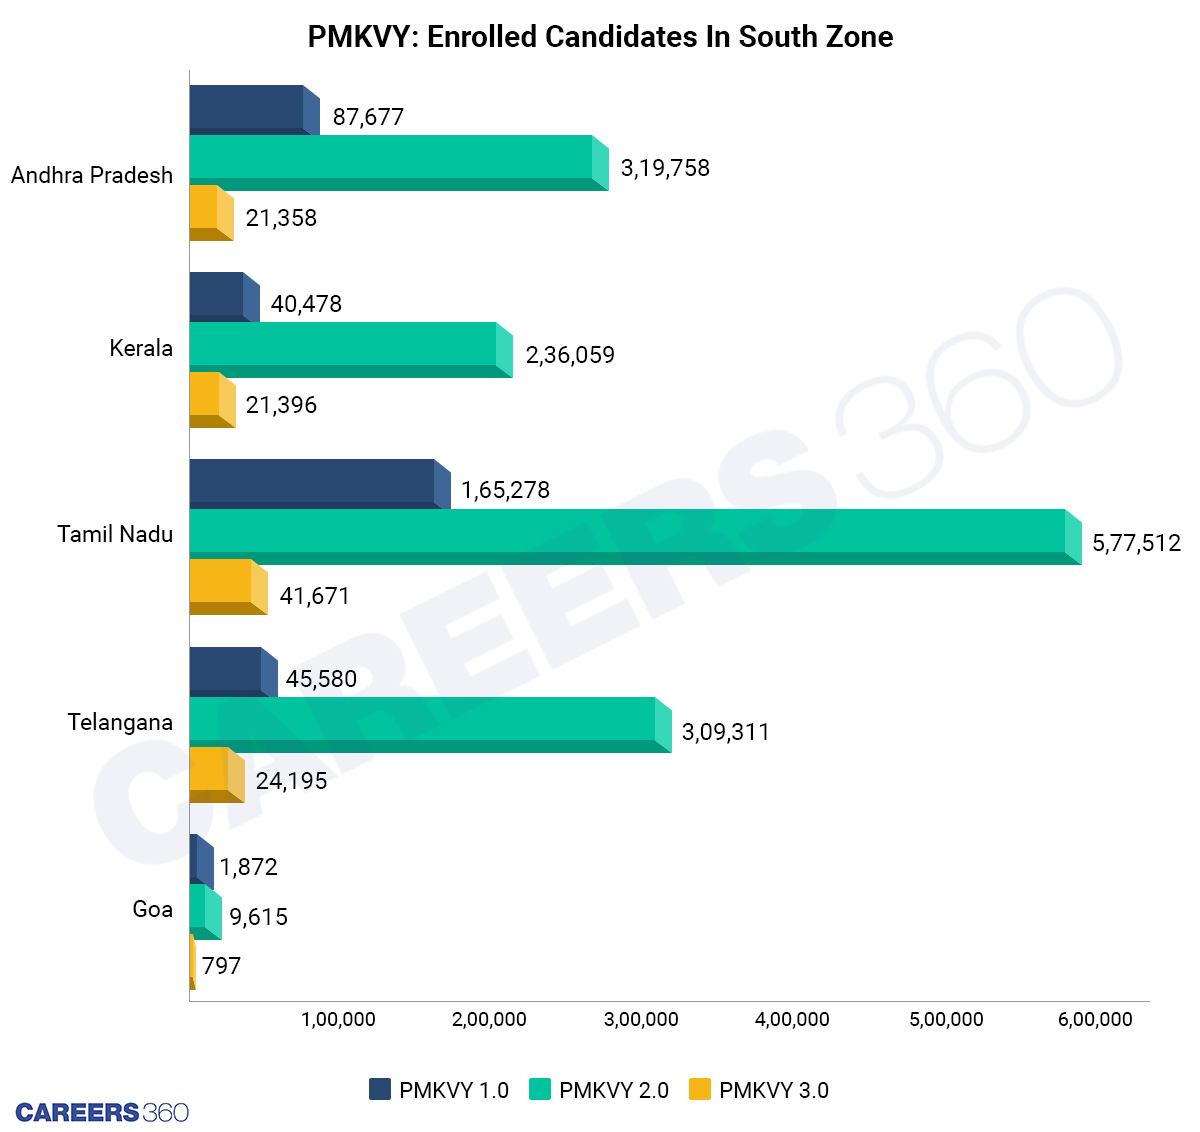 South Zone: Candidates Enrolled in PMKVY